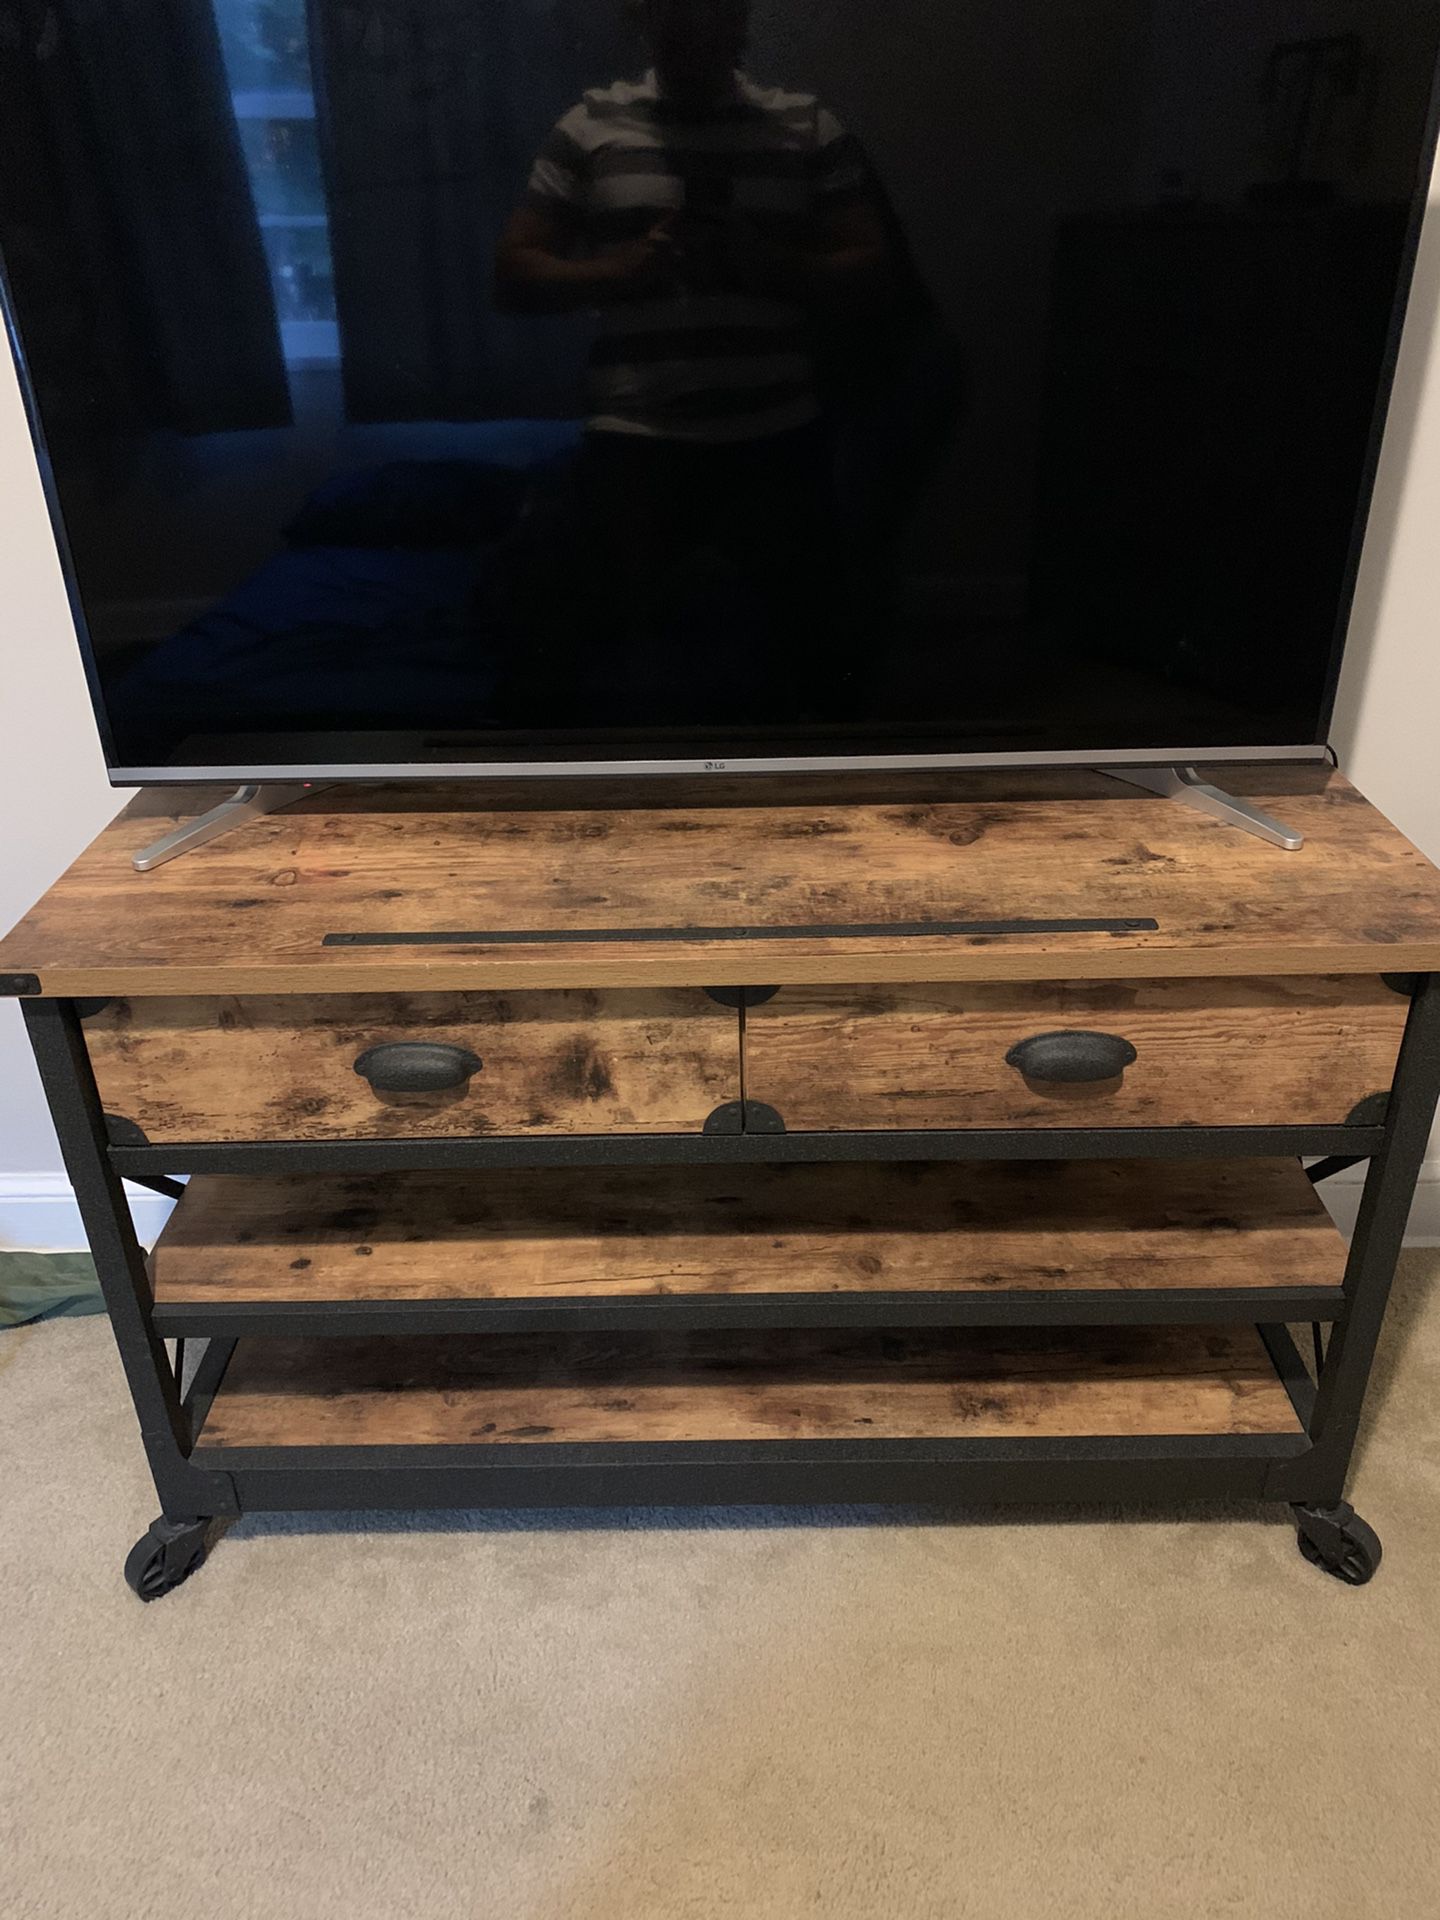 TV stand with minor scrape (second picture).